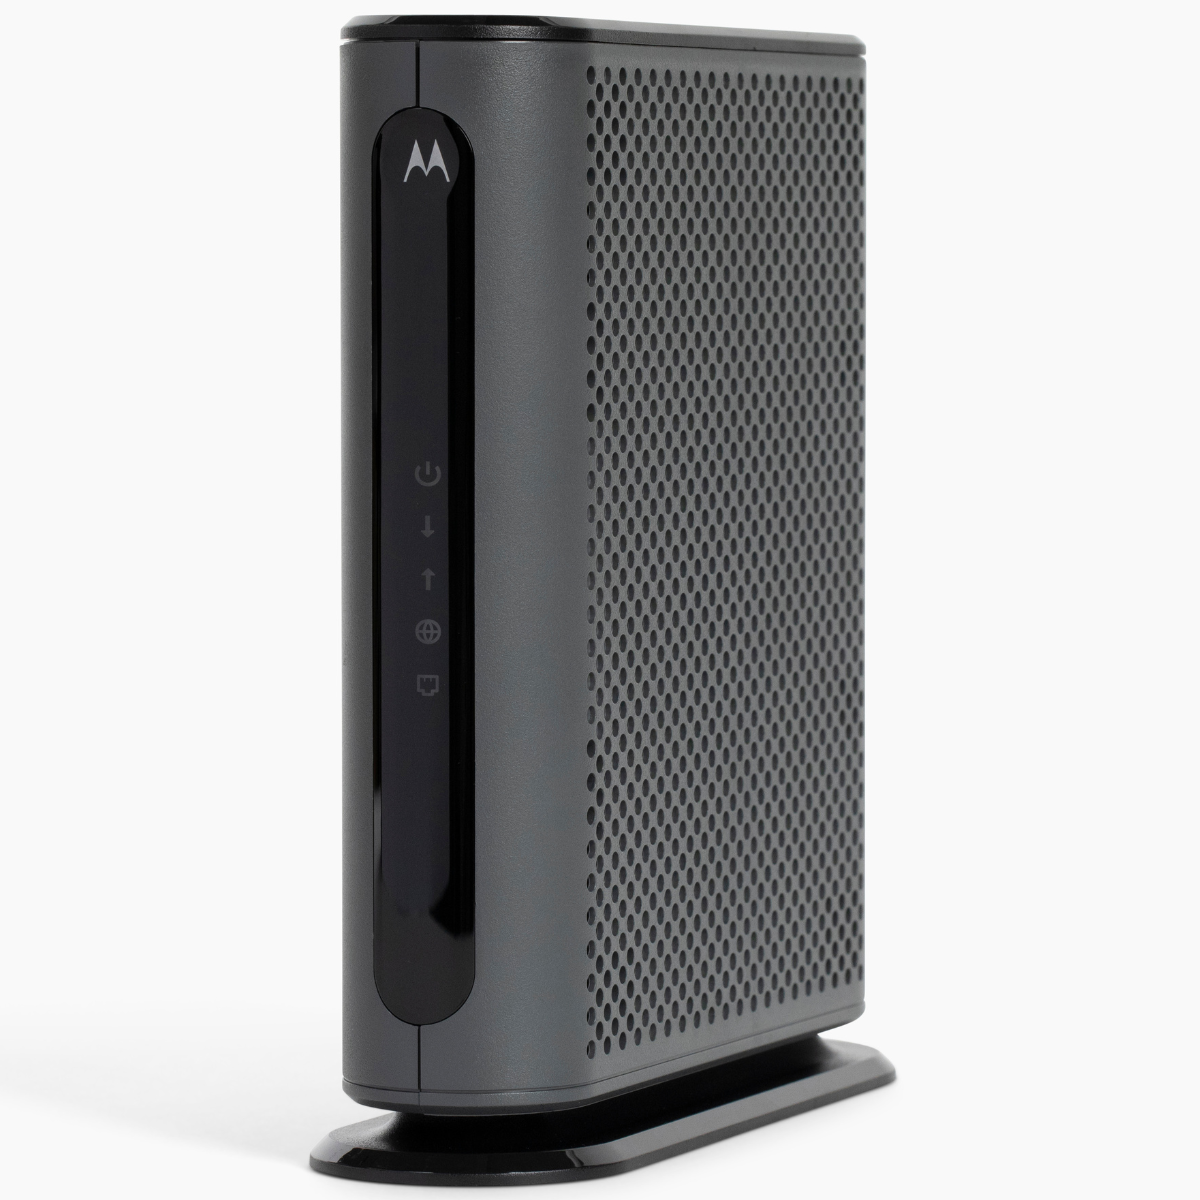 Motorola MB8600 DOCSIS 3.1 Ultra-High Speed Cable Modem | Approved for Xfinity by Comcast, Spectrum, Cox | Supports Cable Plans up to 1000 Mbps - image 1 of 10